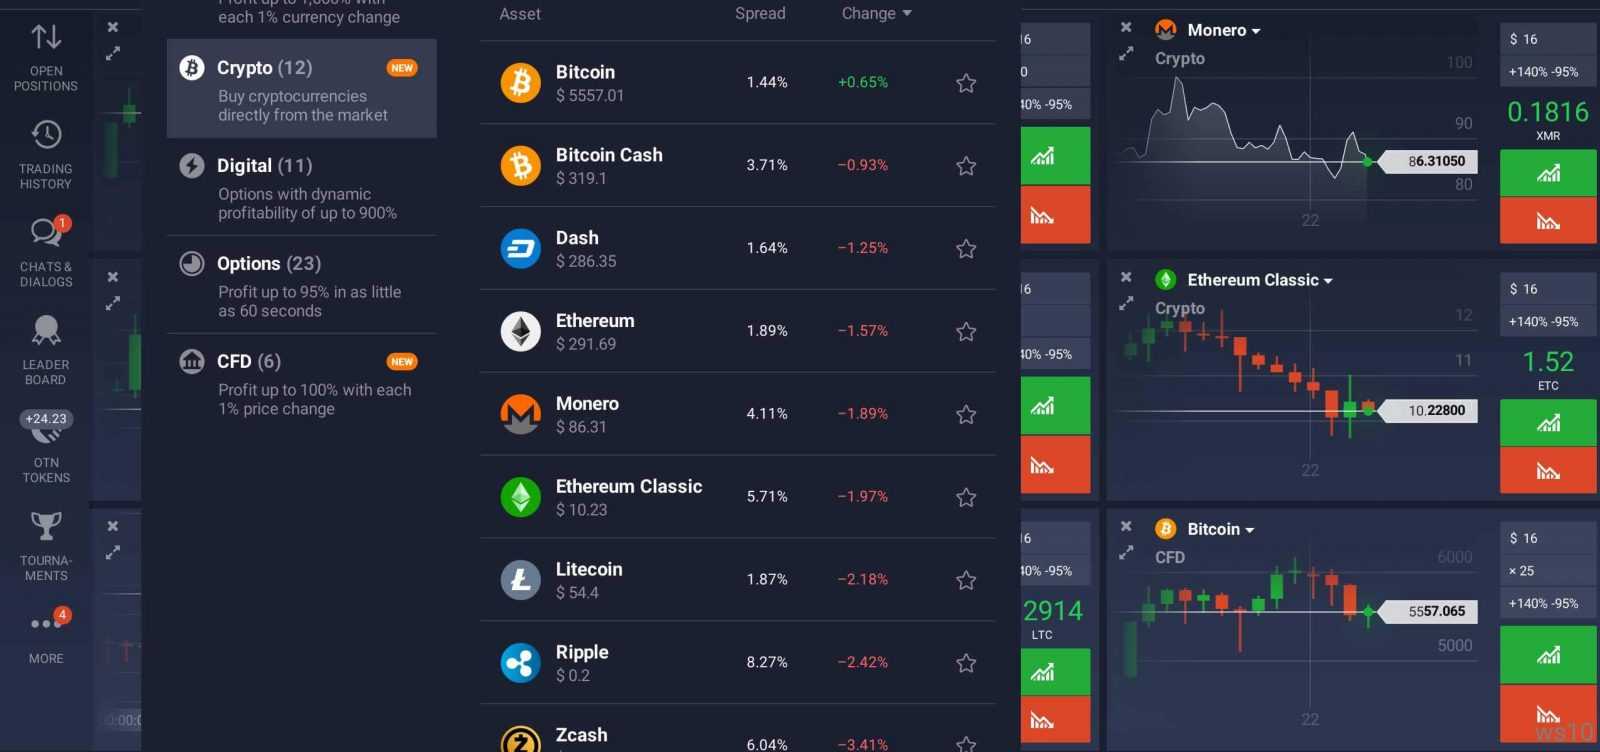 Cryptocurrency Trading with IQ Option: BTC, ETH, MIOTA, XRP and others